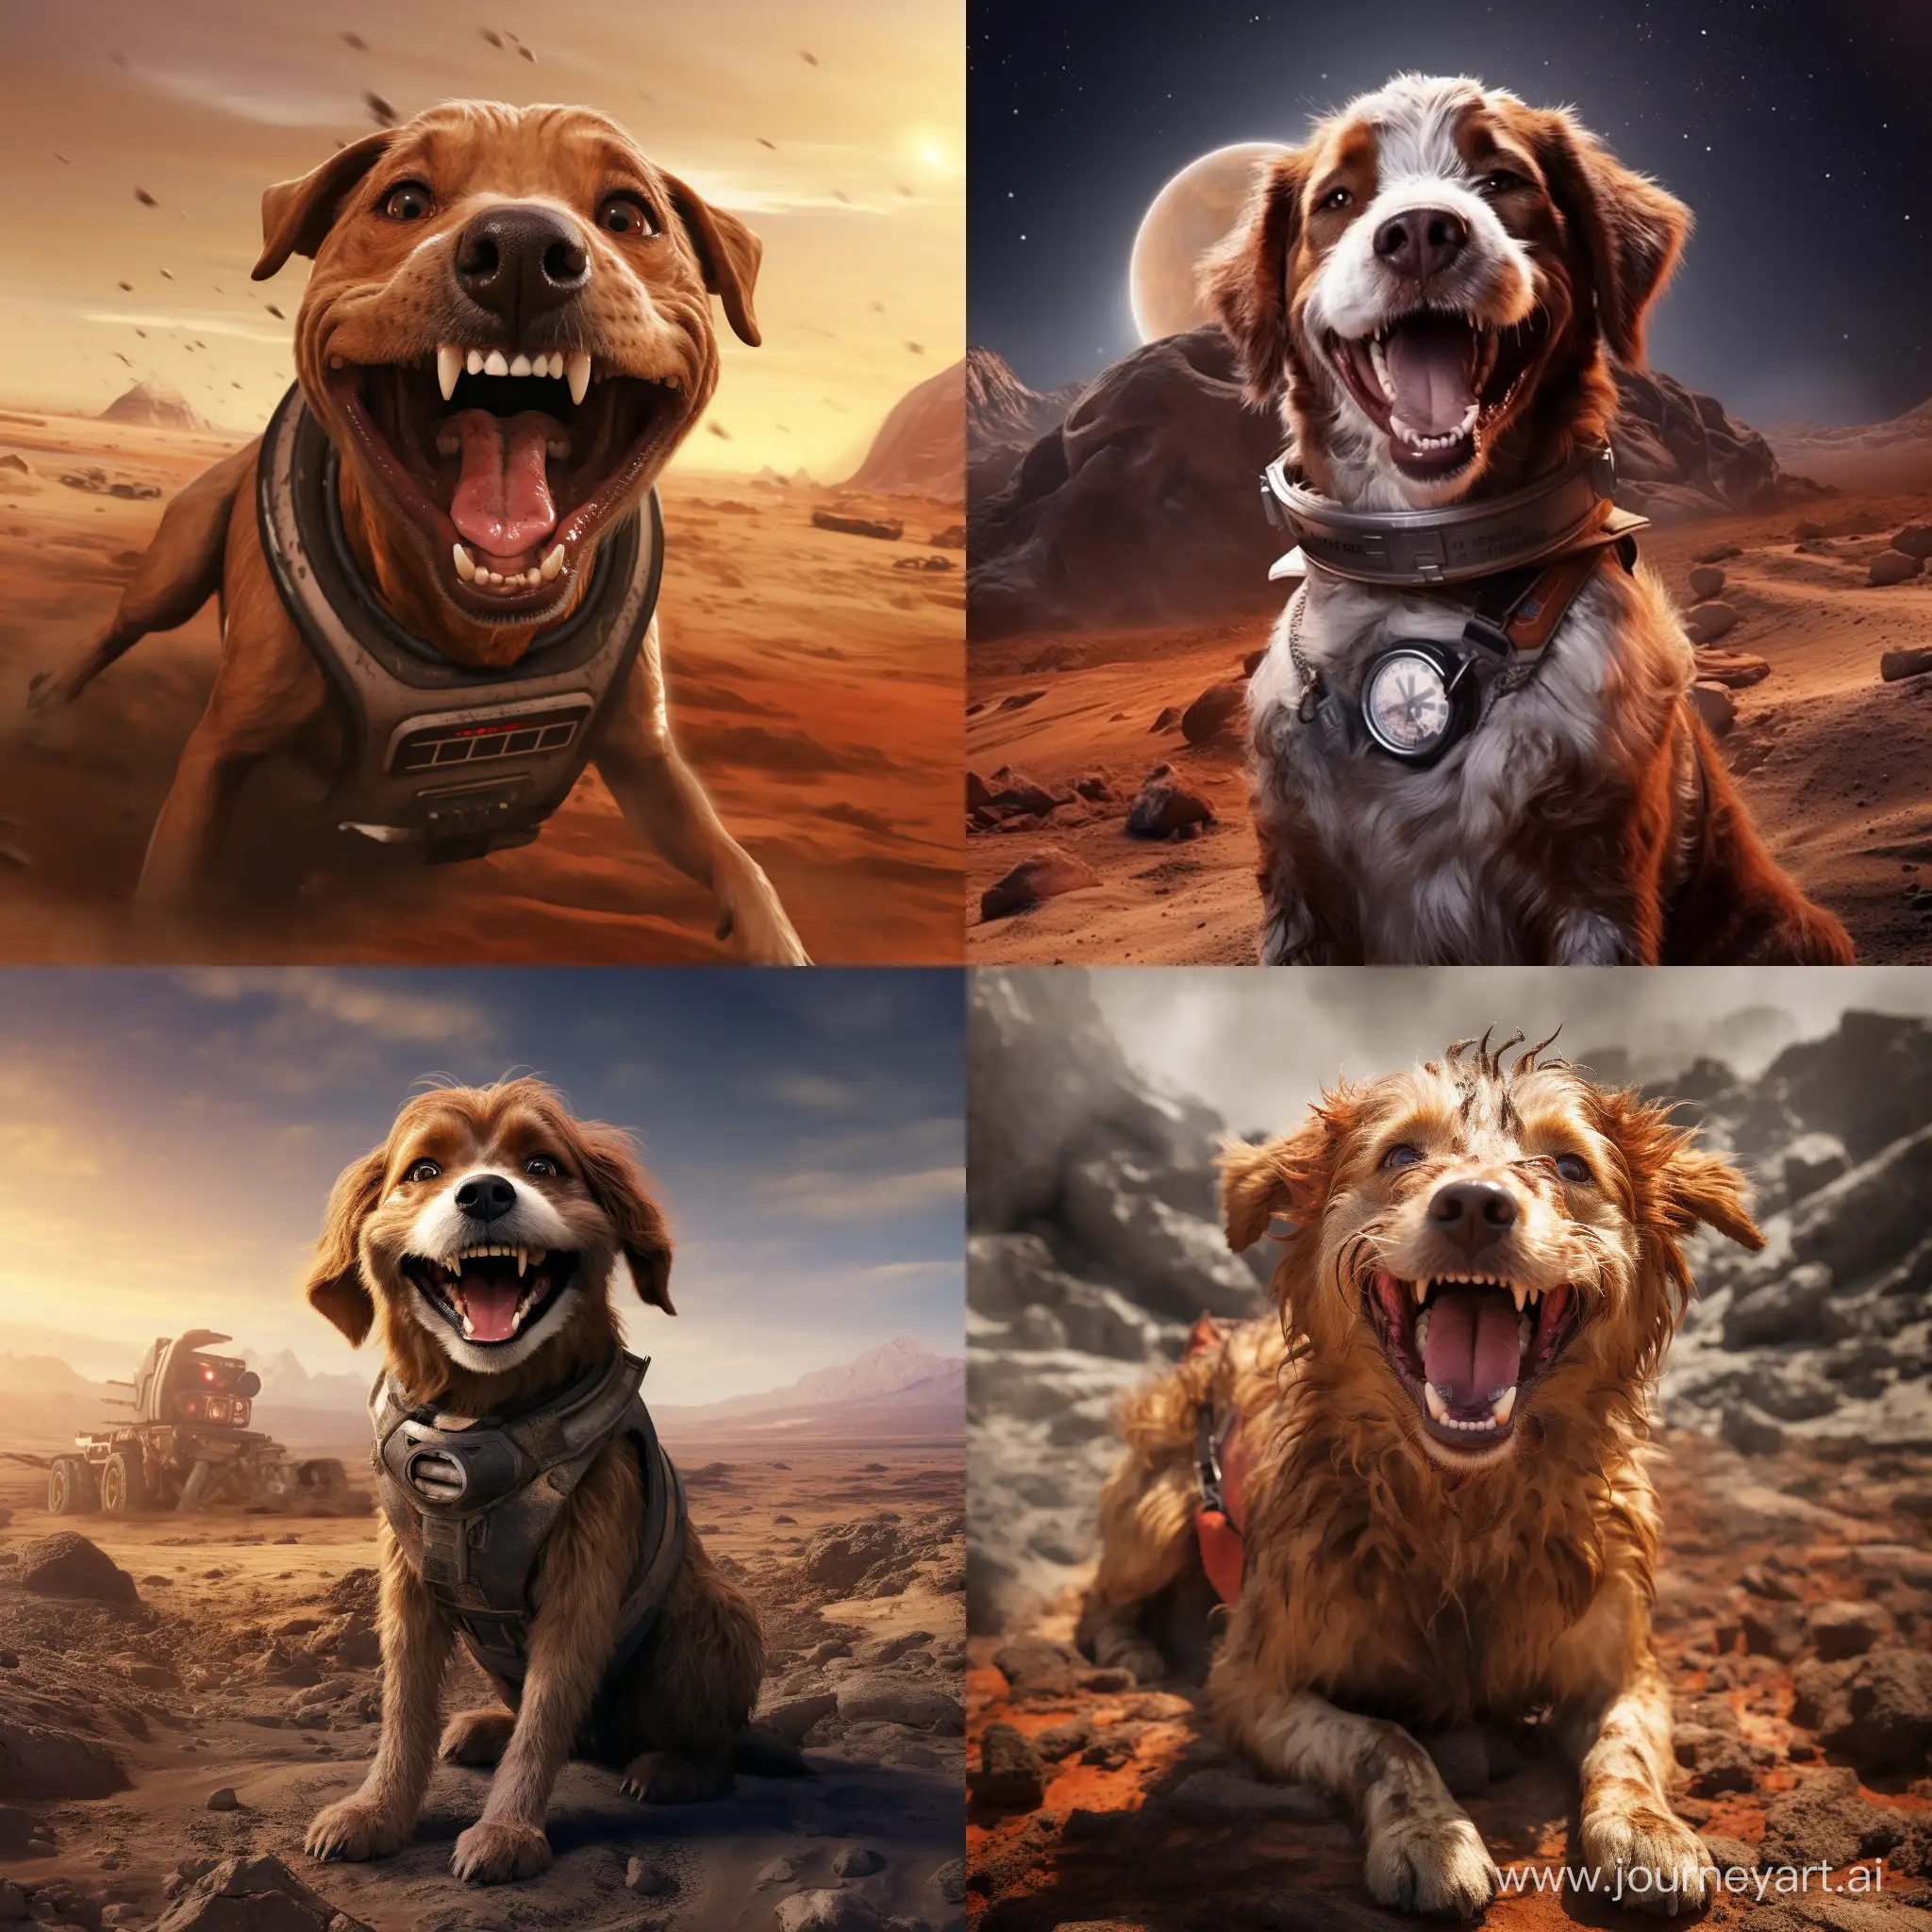 Cheerful-Canine-Exploration-on-the-Martian-Surface